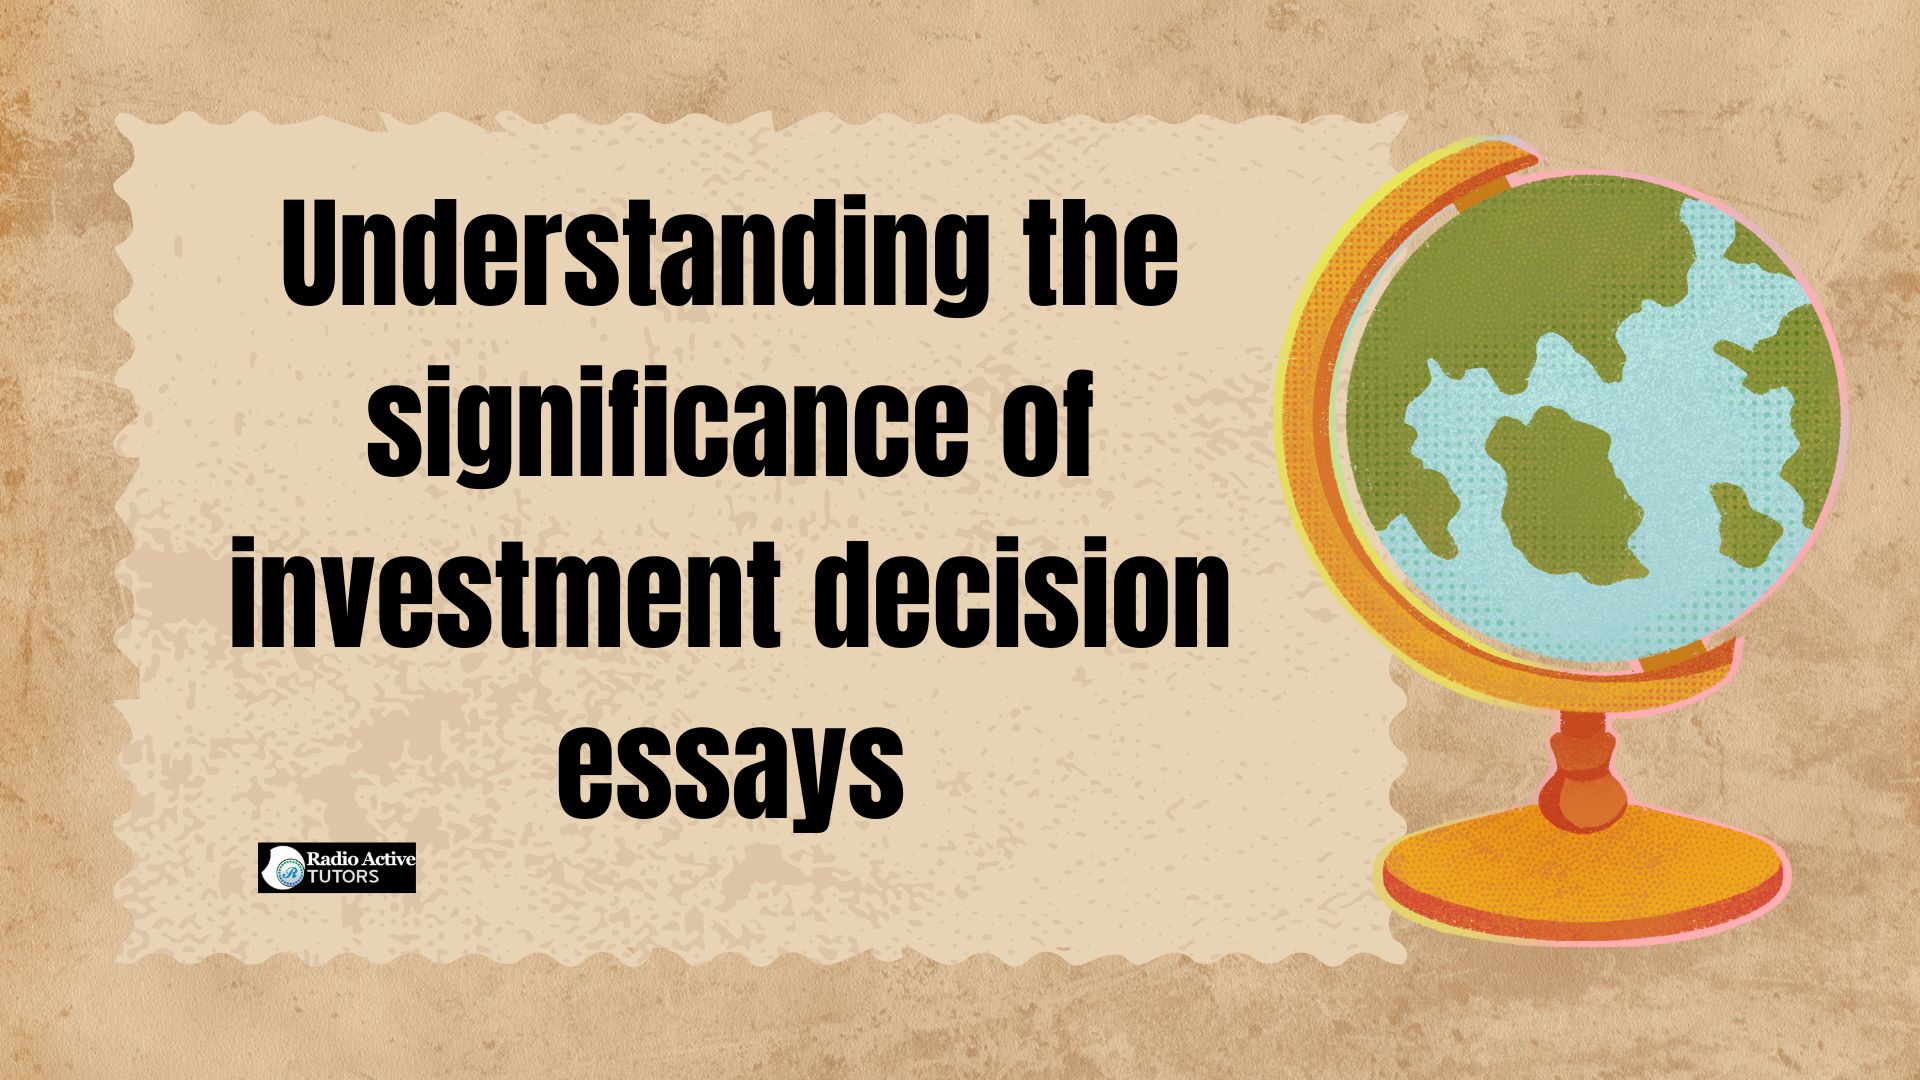 essay about investment decision